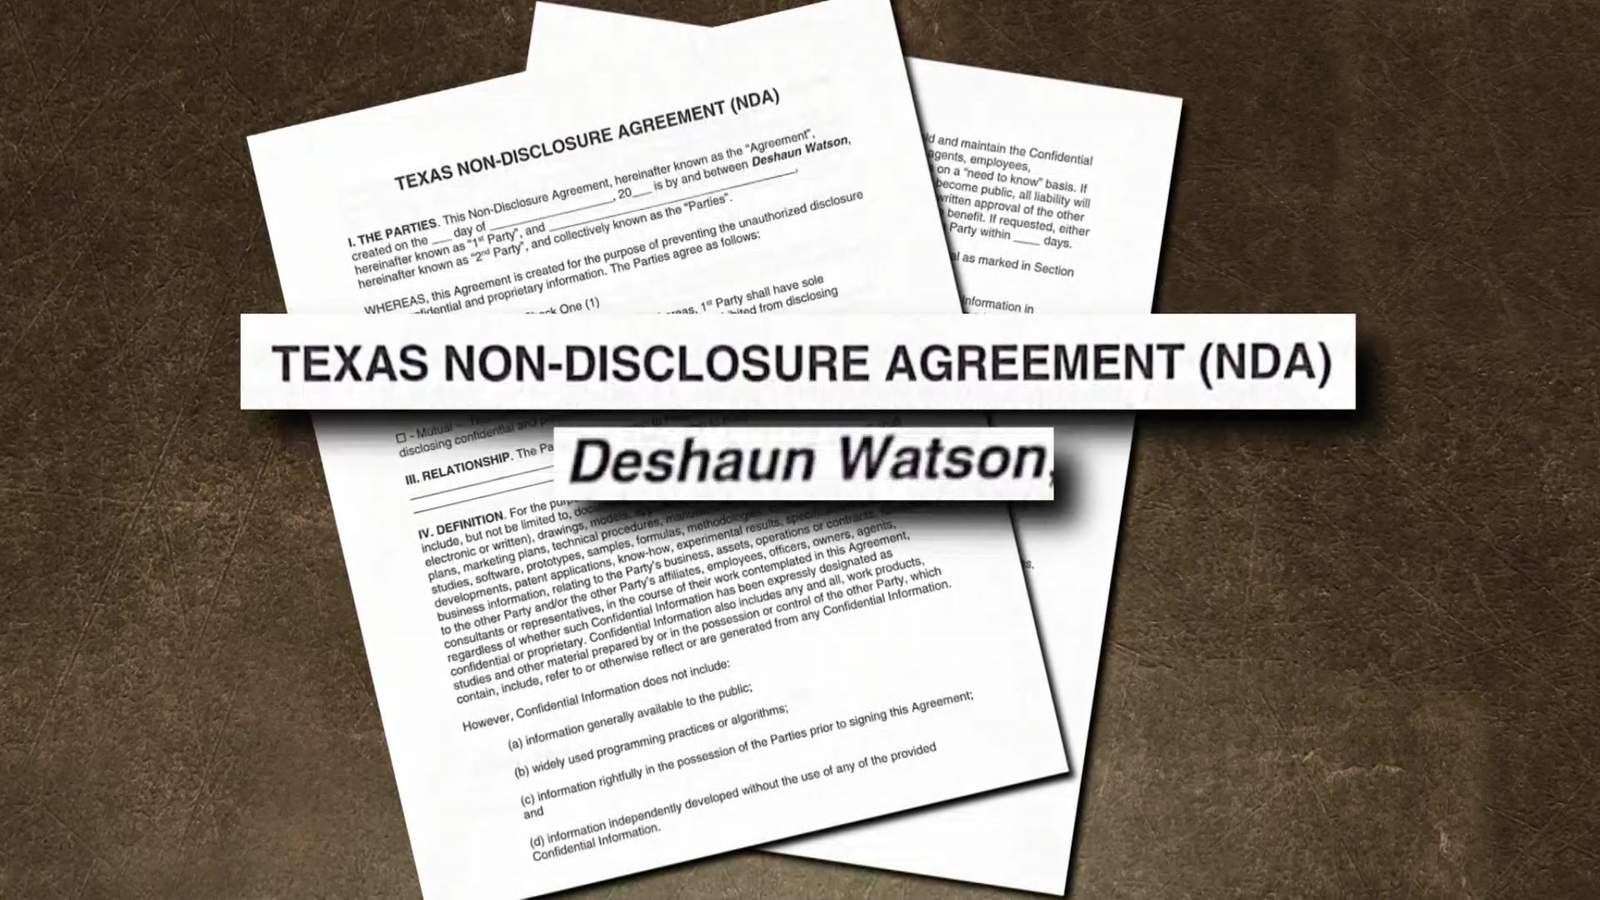 EXCLUSIVE: Sources share copy of NDA that 1 of Deshaun Watson’s accusers says player sent to her